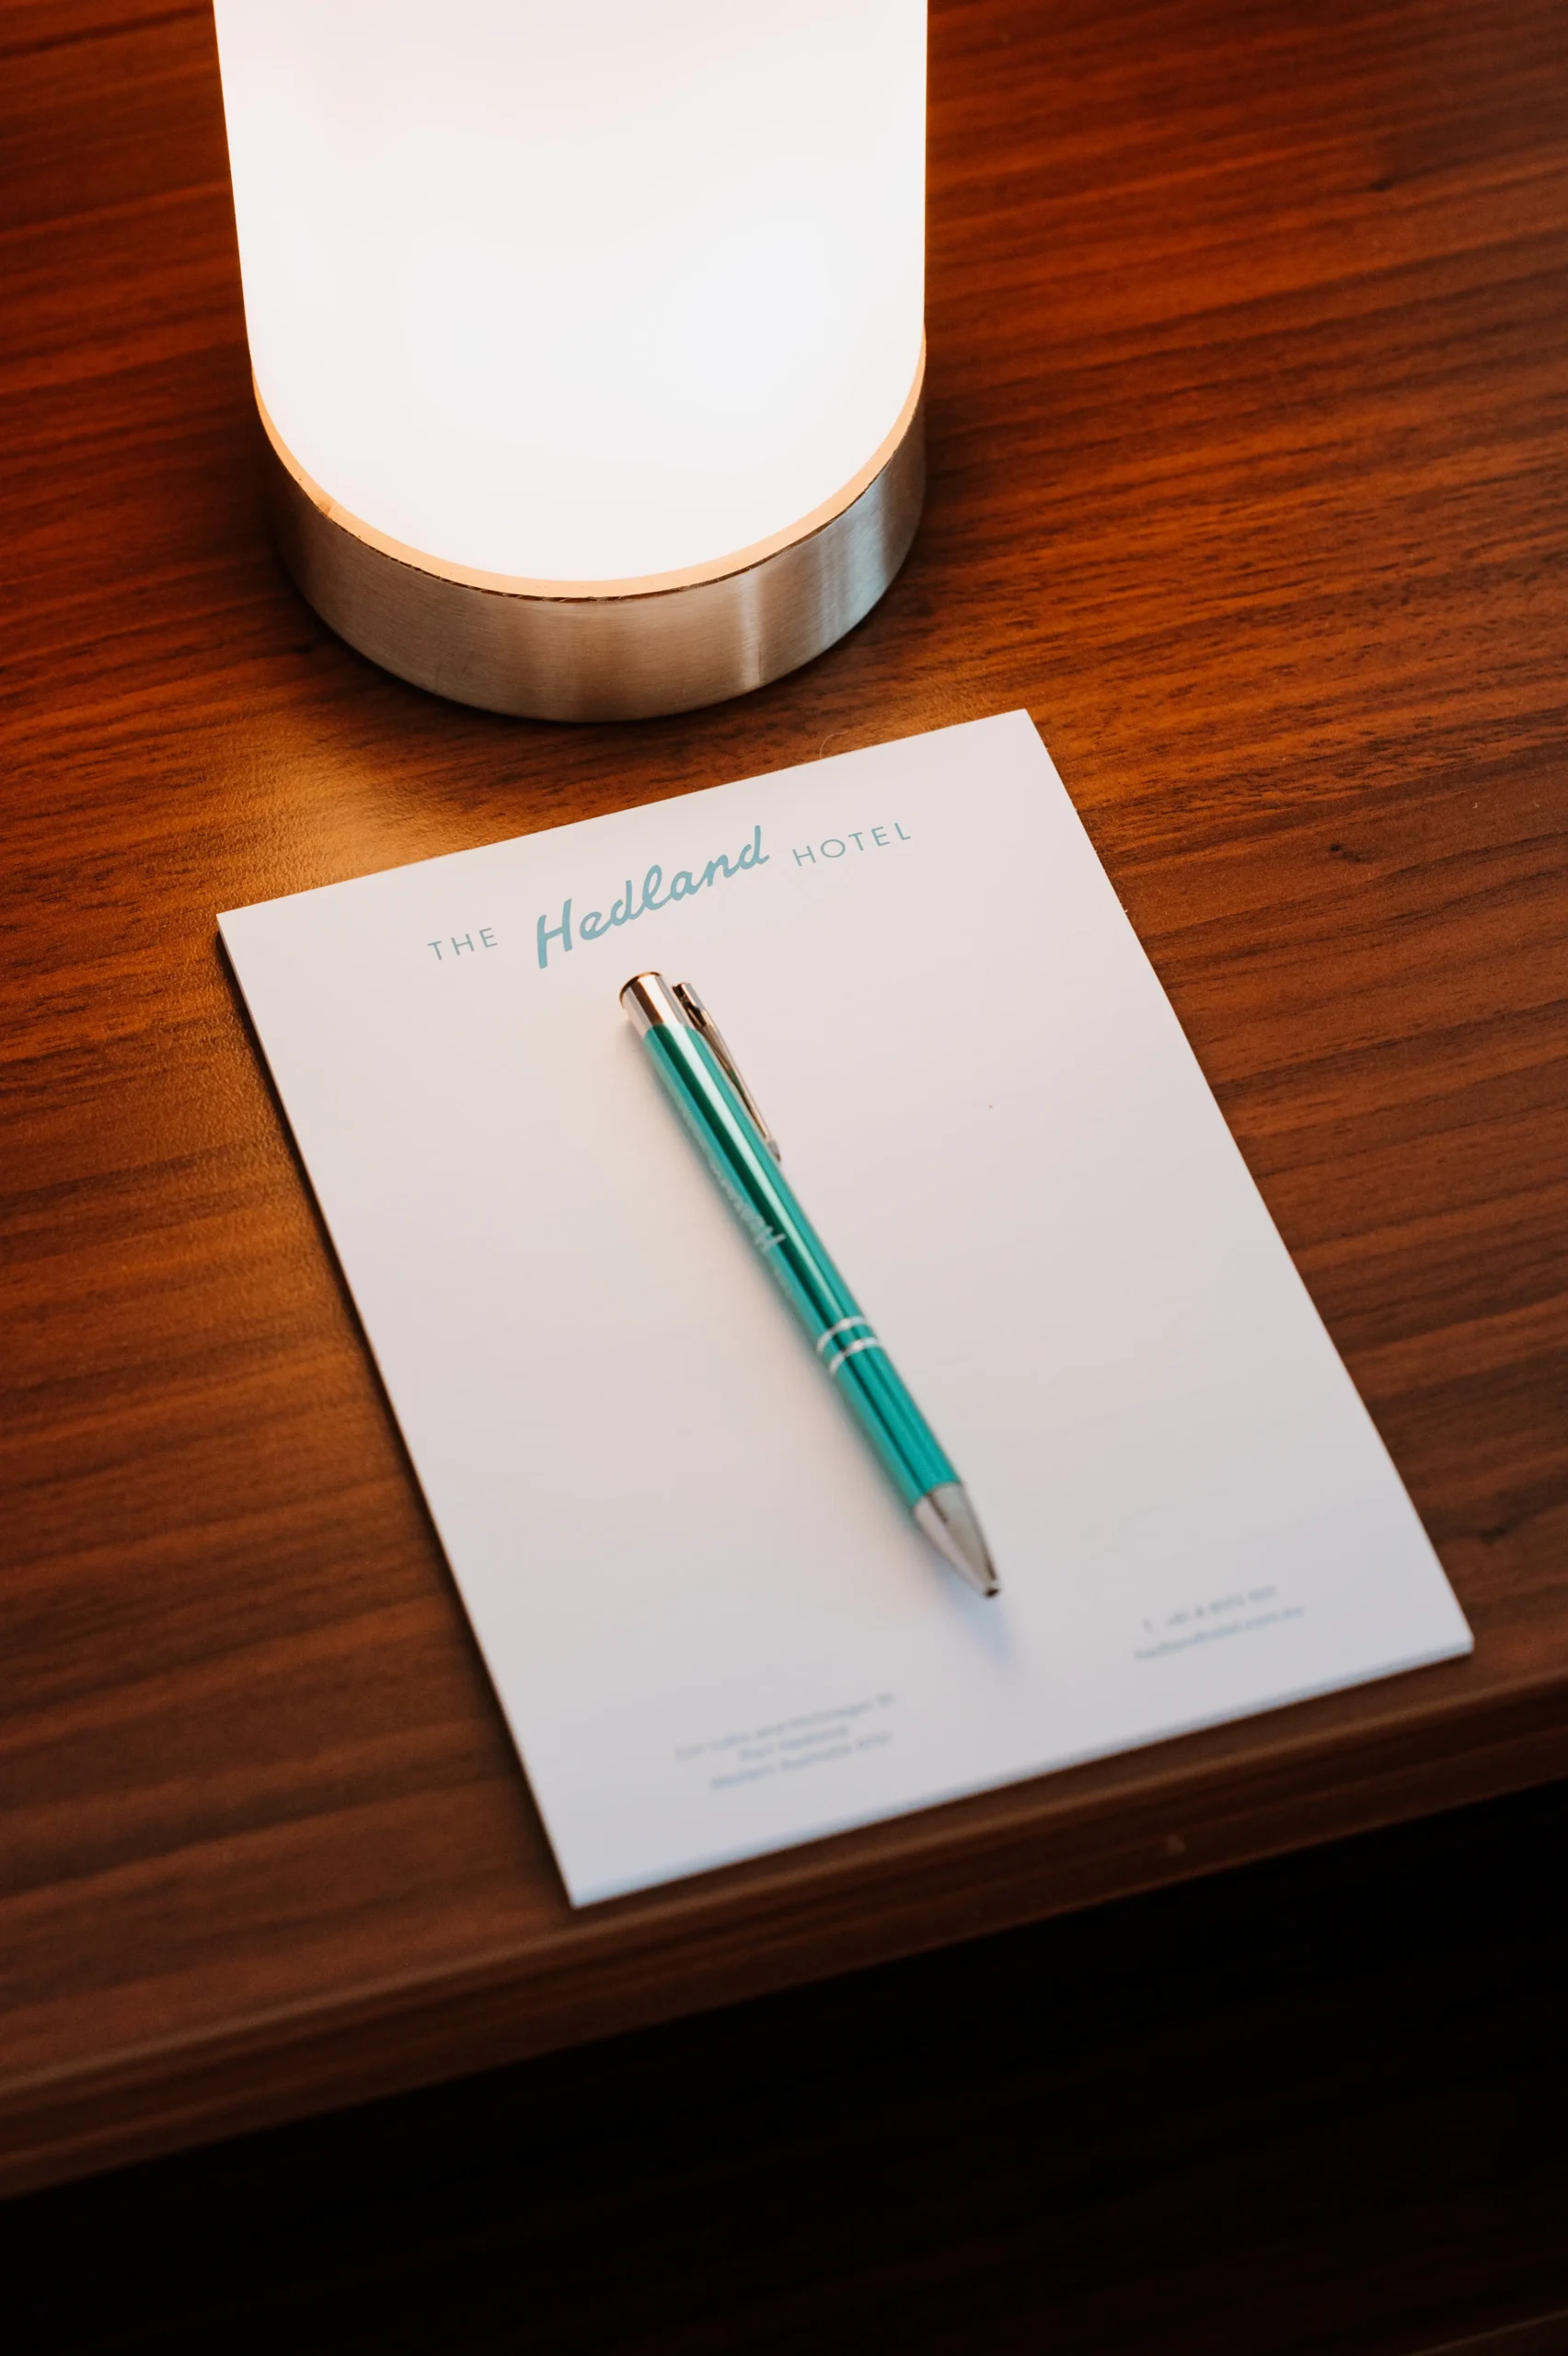 a close up of a pen and paper with The Hedland Hotel logo on the bedside table